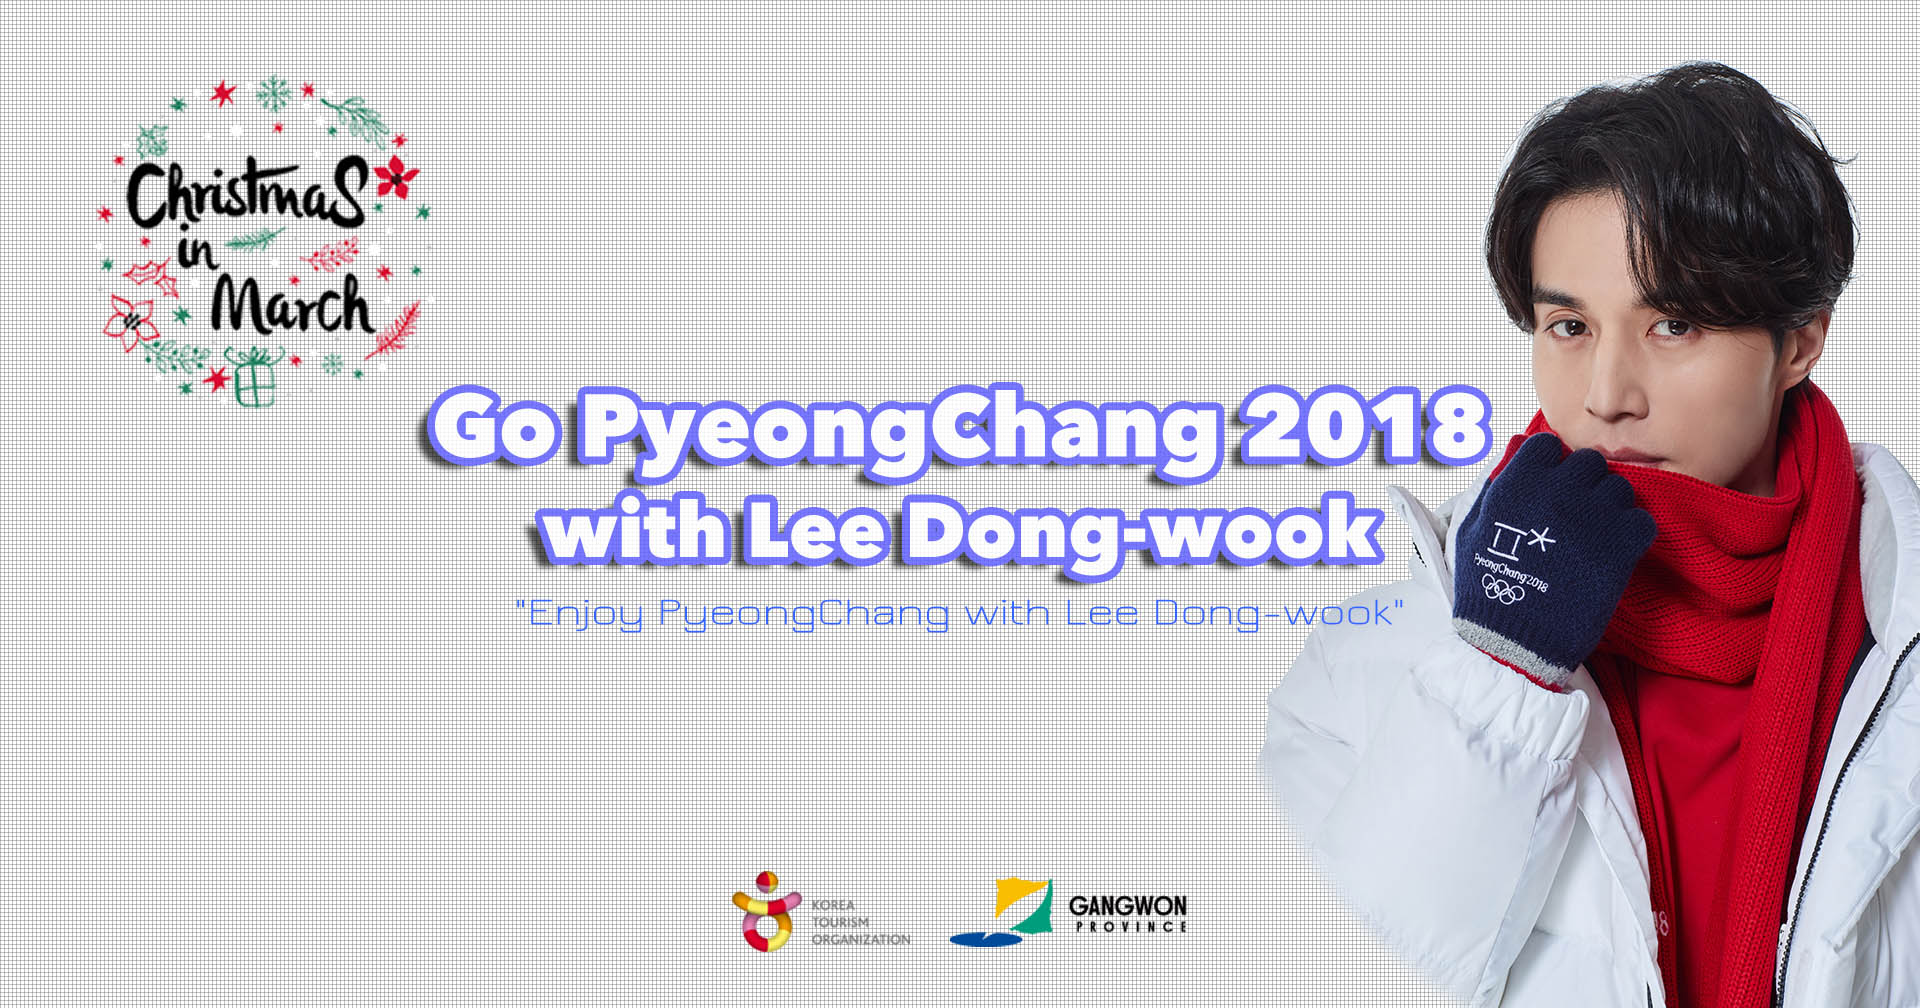 Lee Dong Wook To Hold FREE “Go PyeongChang 2018” Exclusive Fan Meeting For International Fans